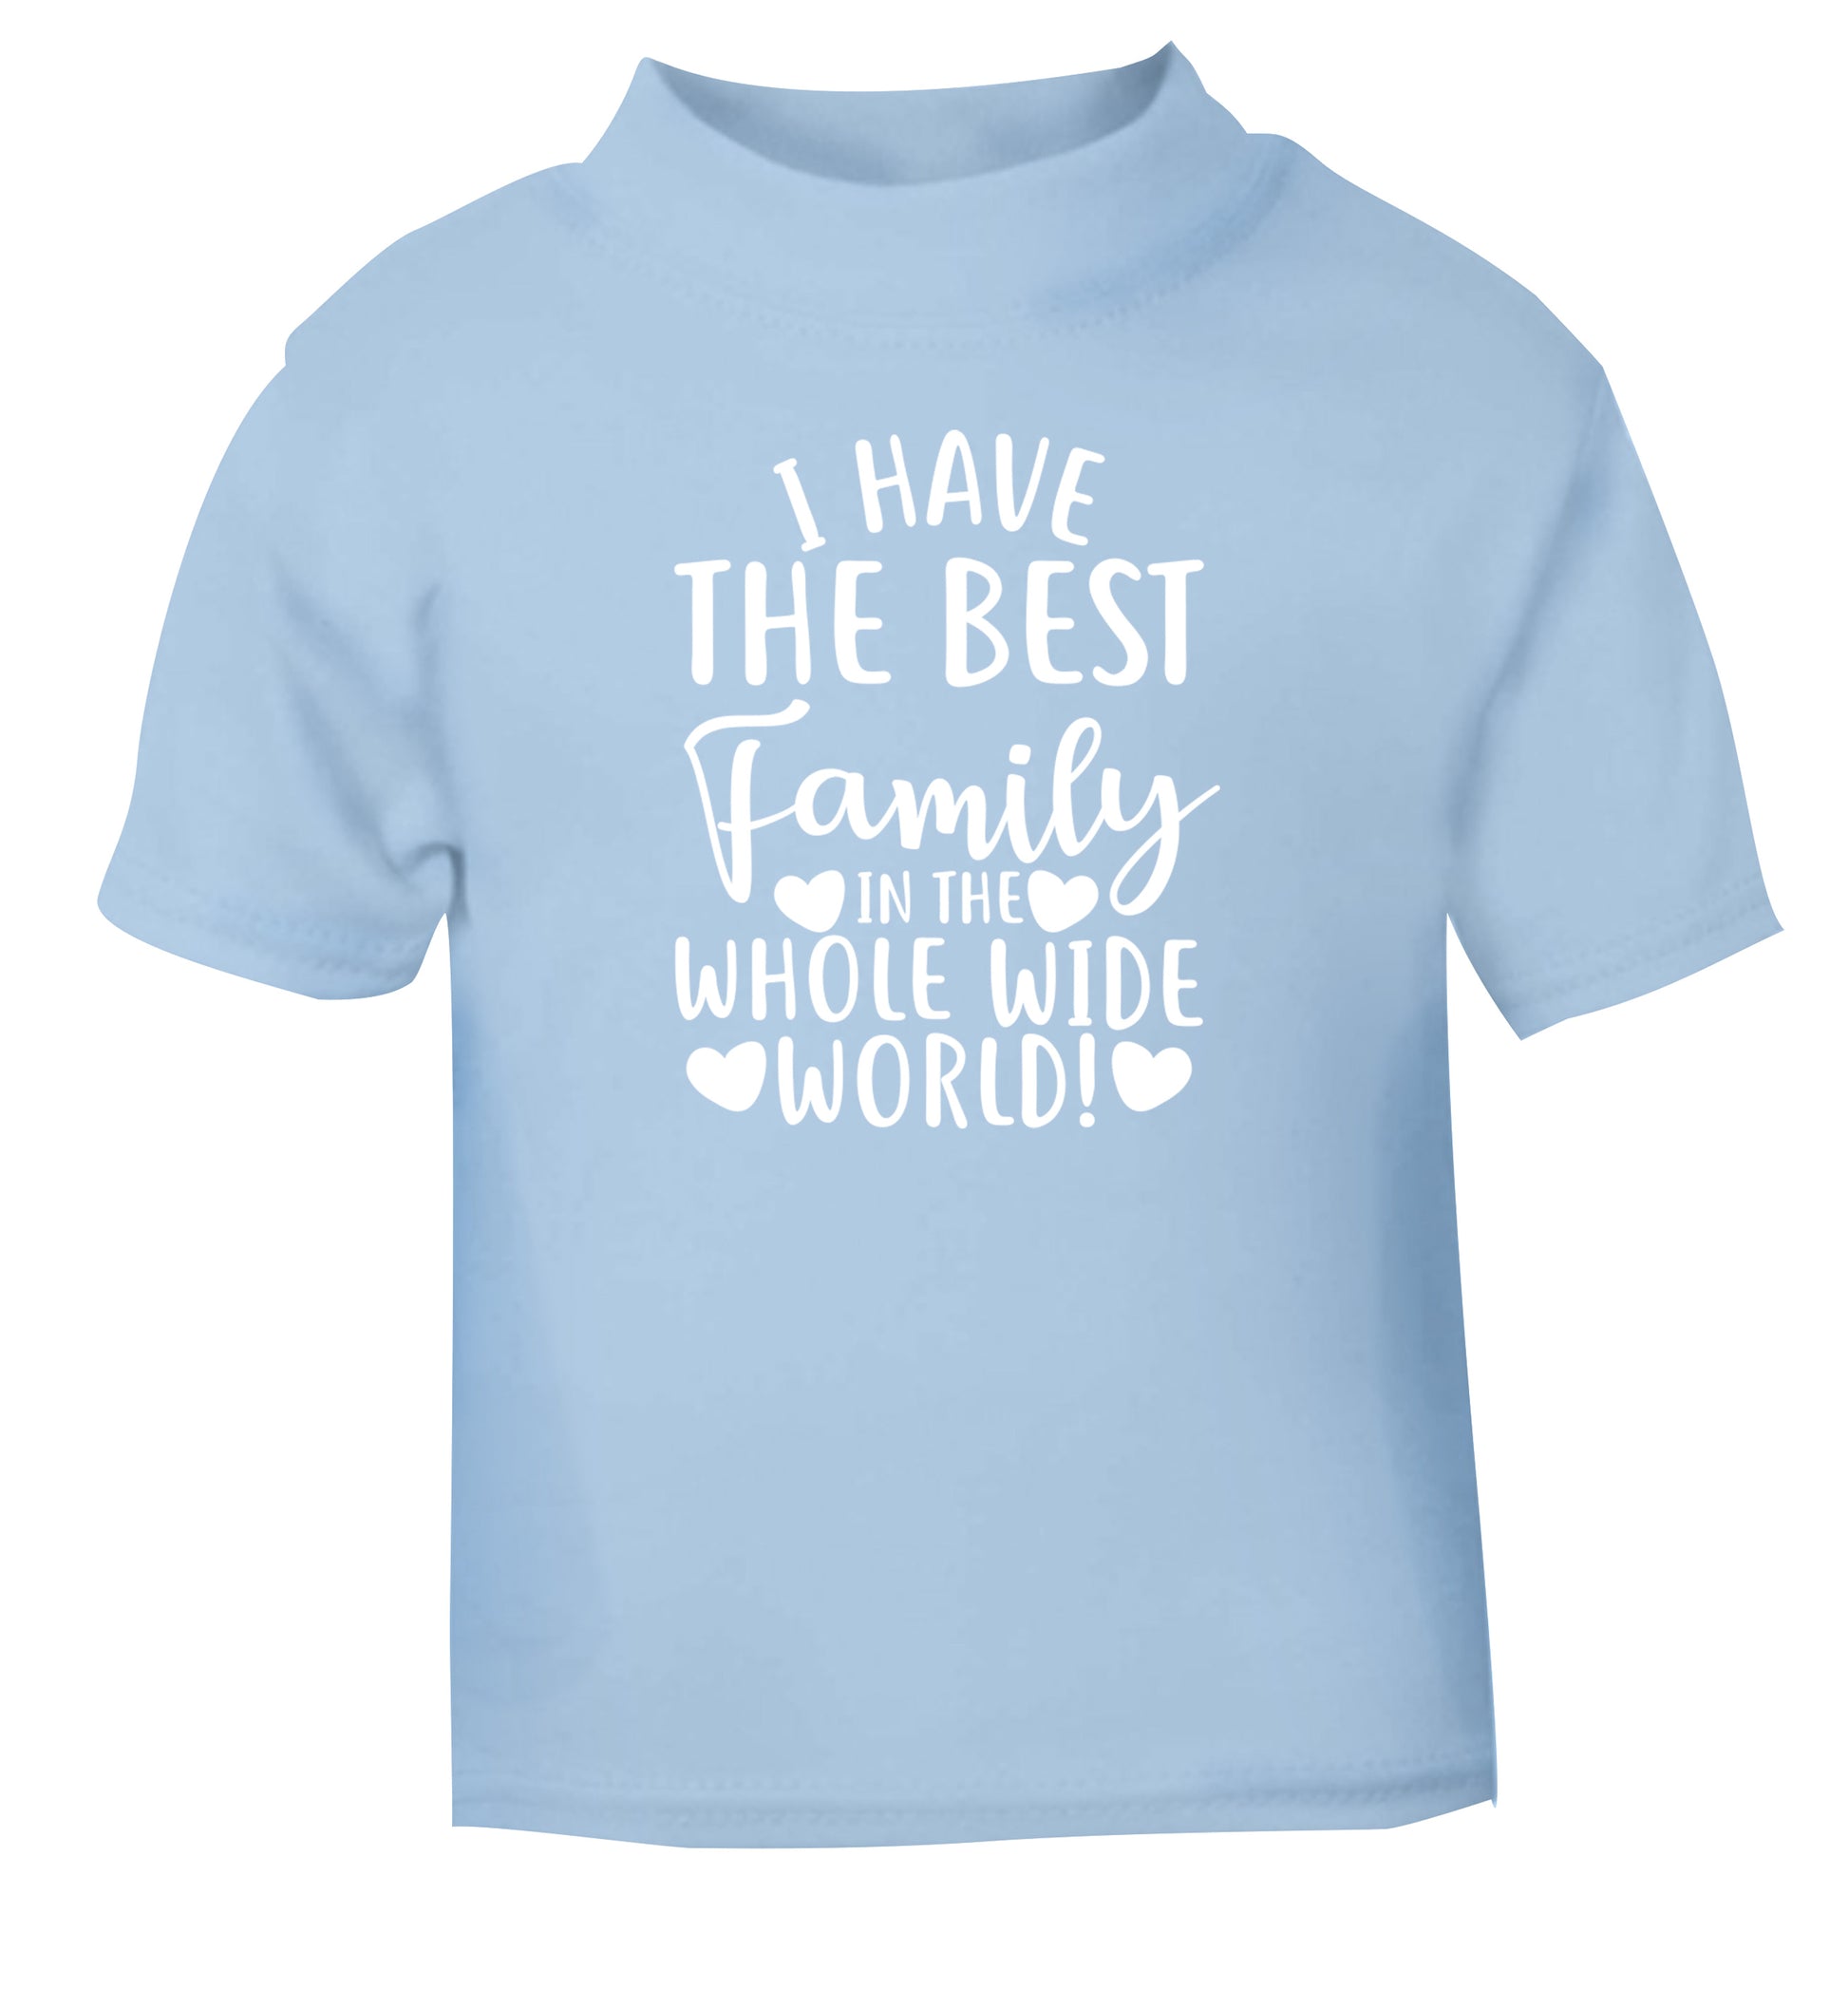 I have the best family in the whole wide world! light blue Baby Toddler Tshirt 2 Years